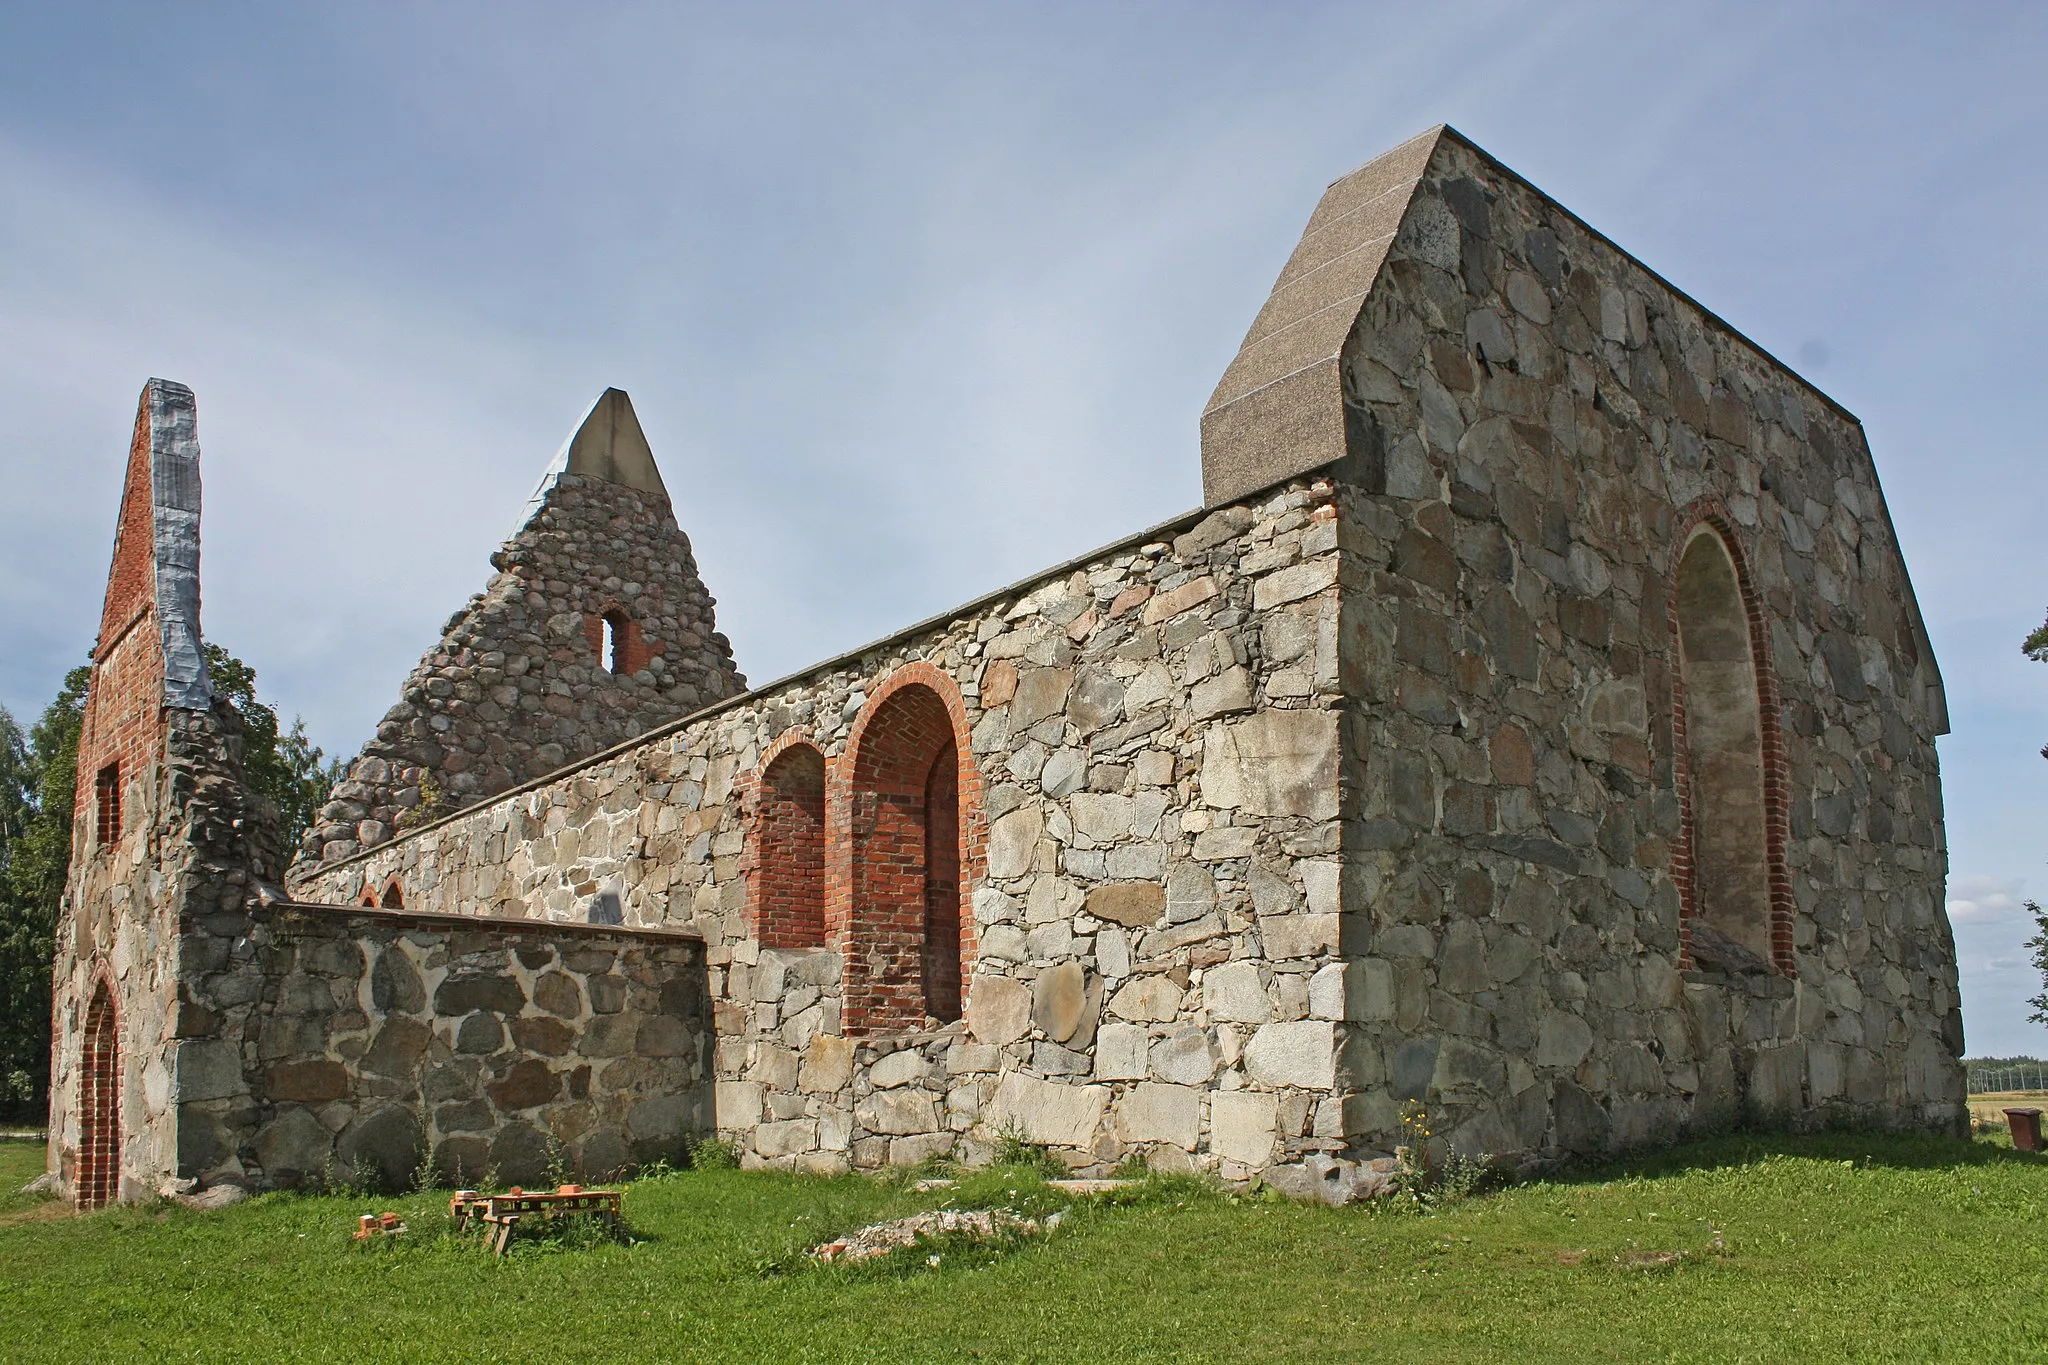 Photo showing: Ruins of the medieval church in Pälkäne, Finland